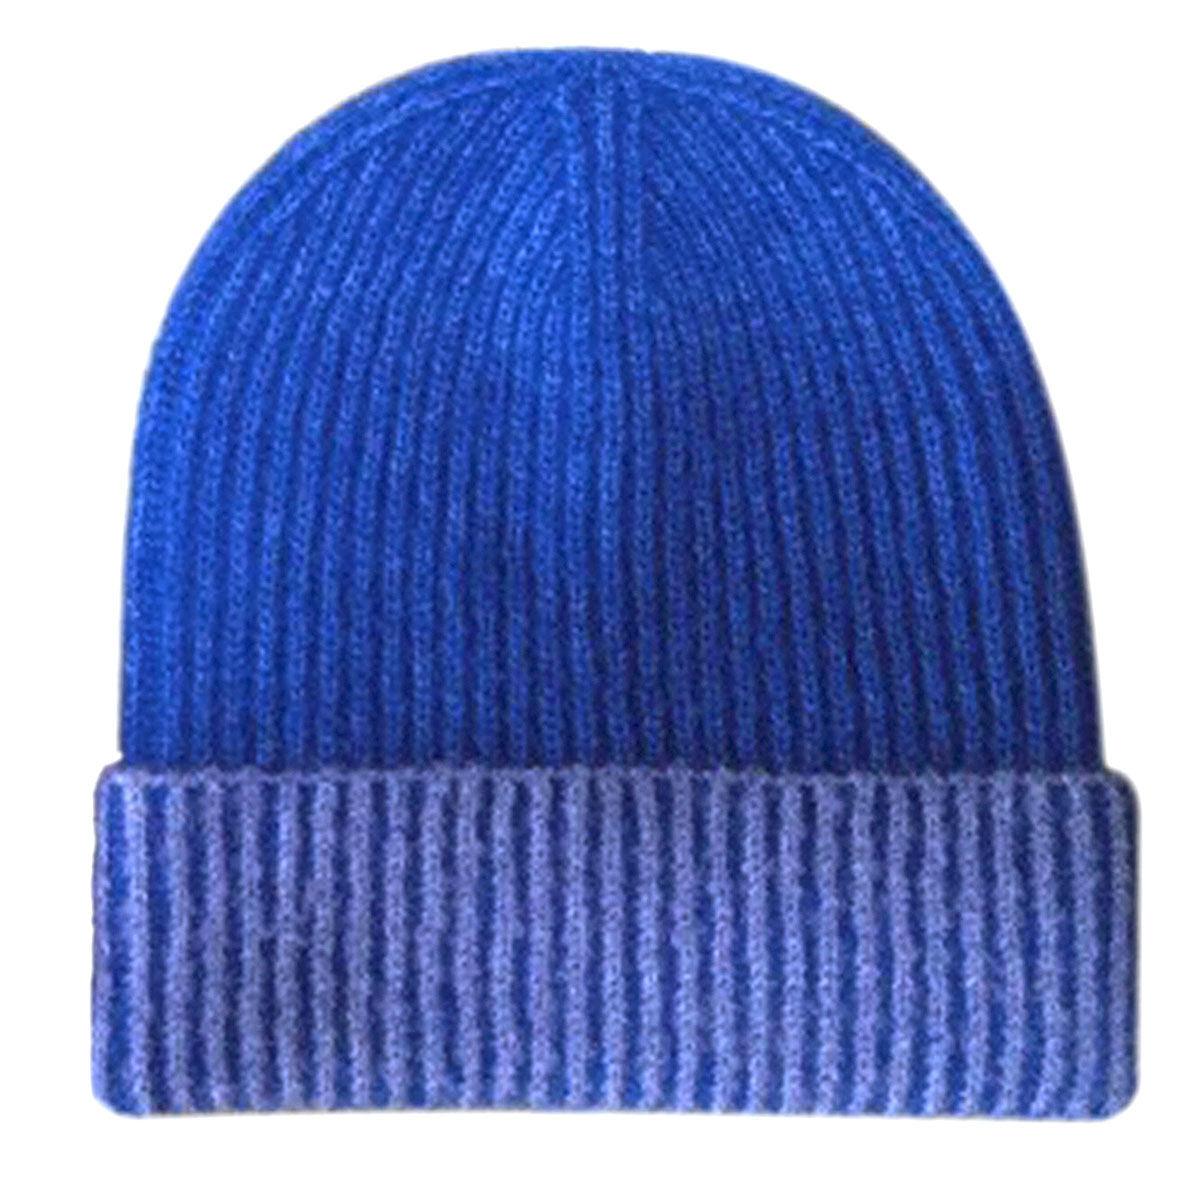 Stay Toasty: Ribbed Knit Beanie Hat in Blue